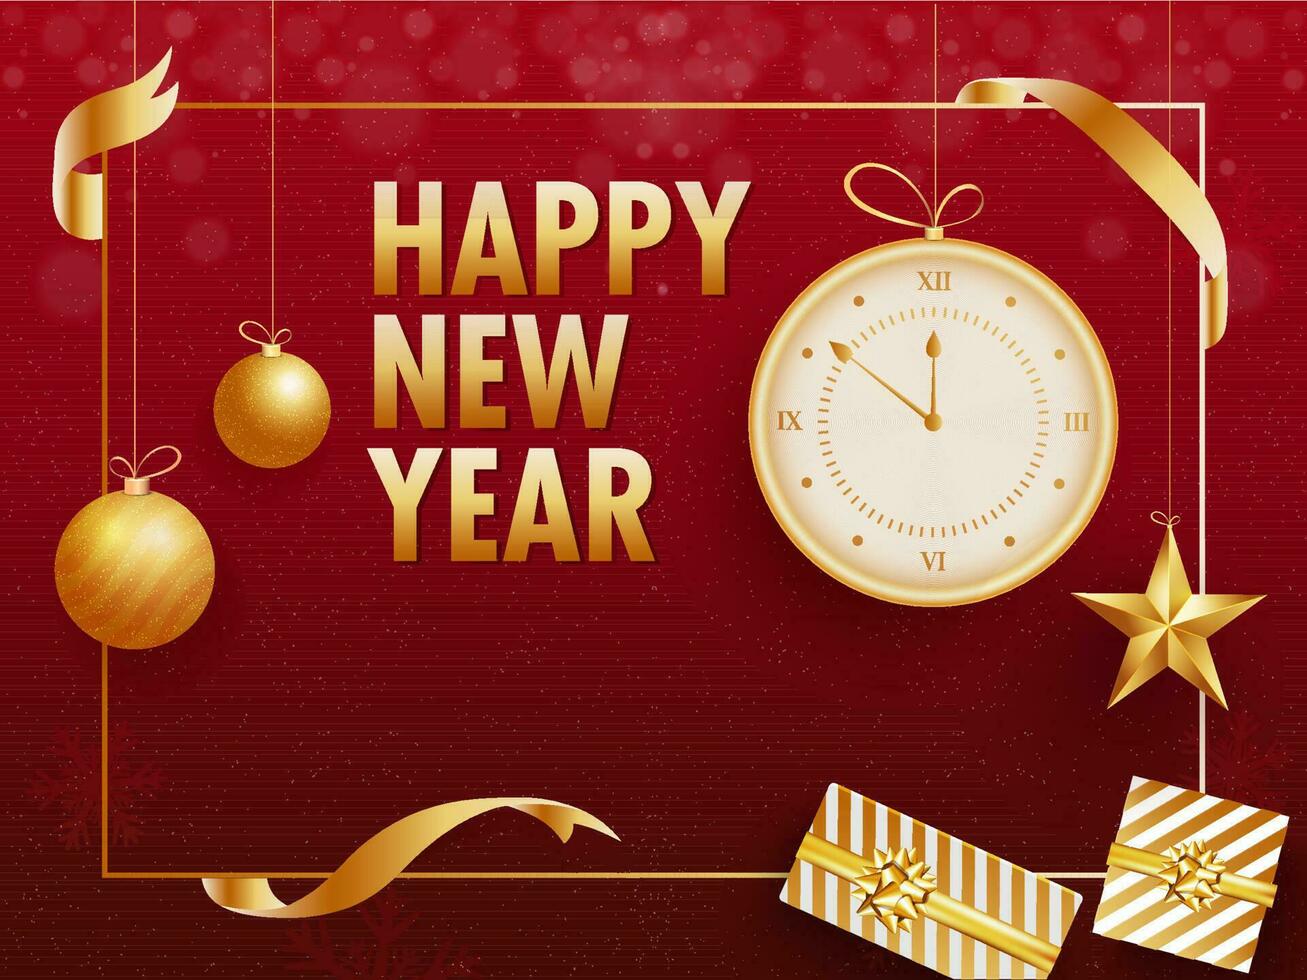 Golden typography of Happy New Year with hanging clock, baubles, star and gift boxes on red background. Can be used as greeting card design. vector